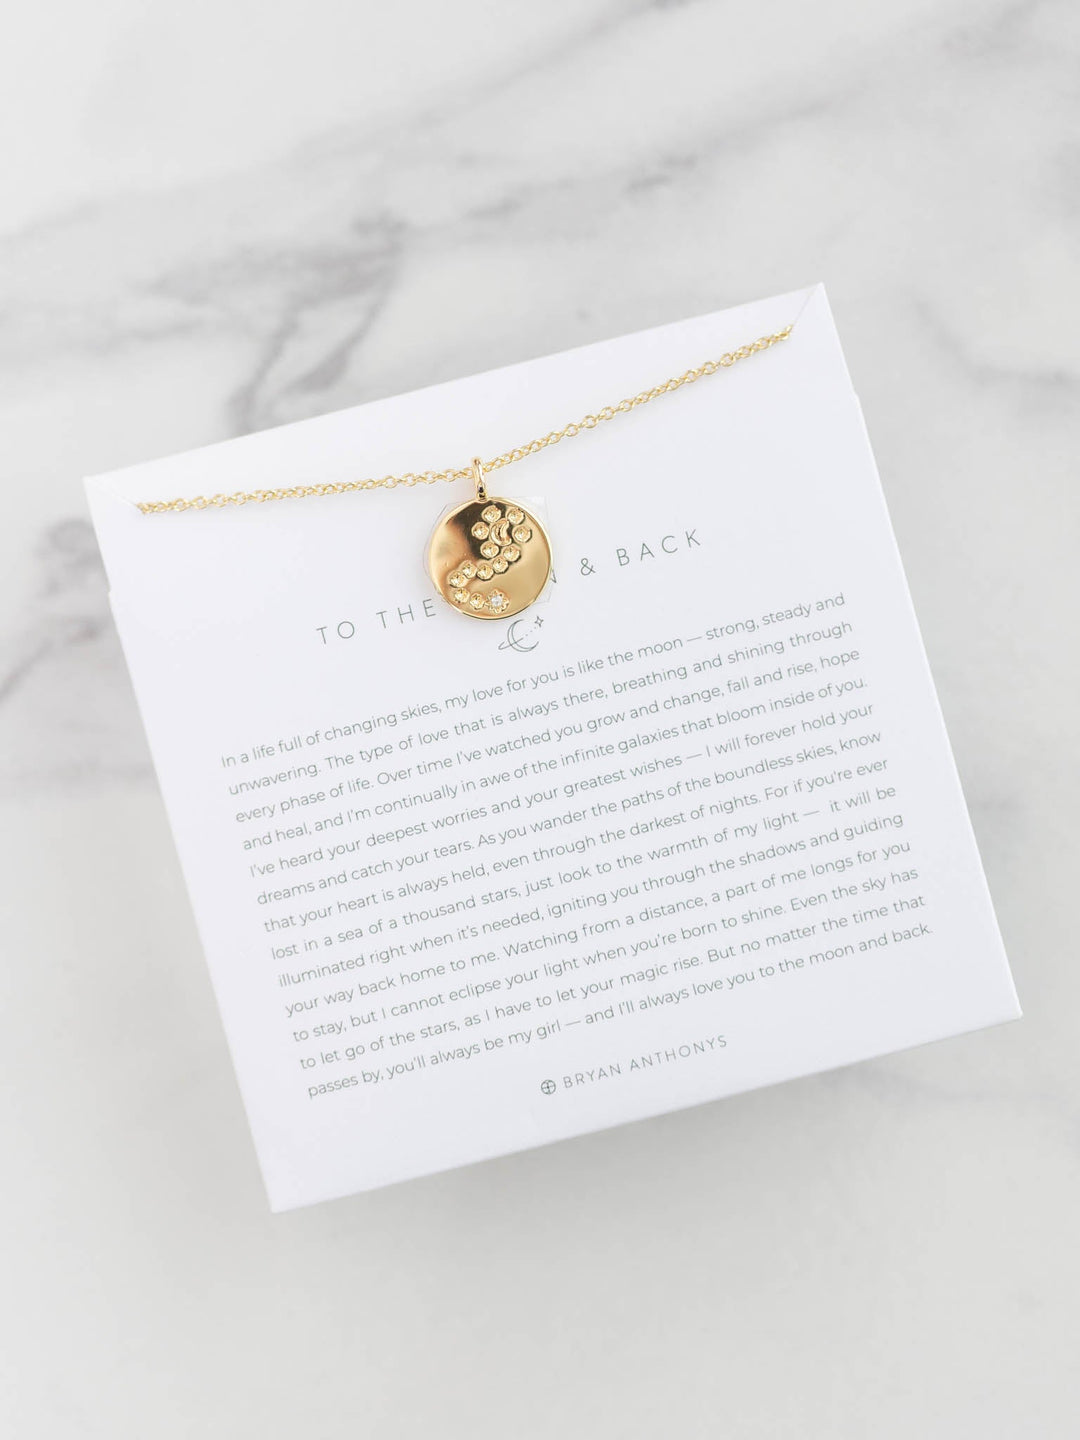 Bryan Anthony To The Moon and Back NecklacePremium necklace